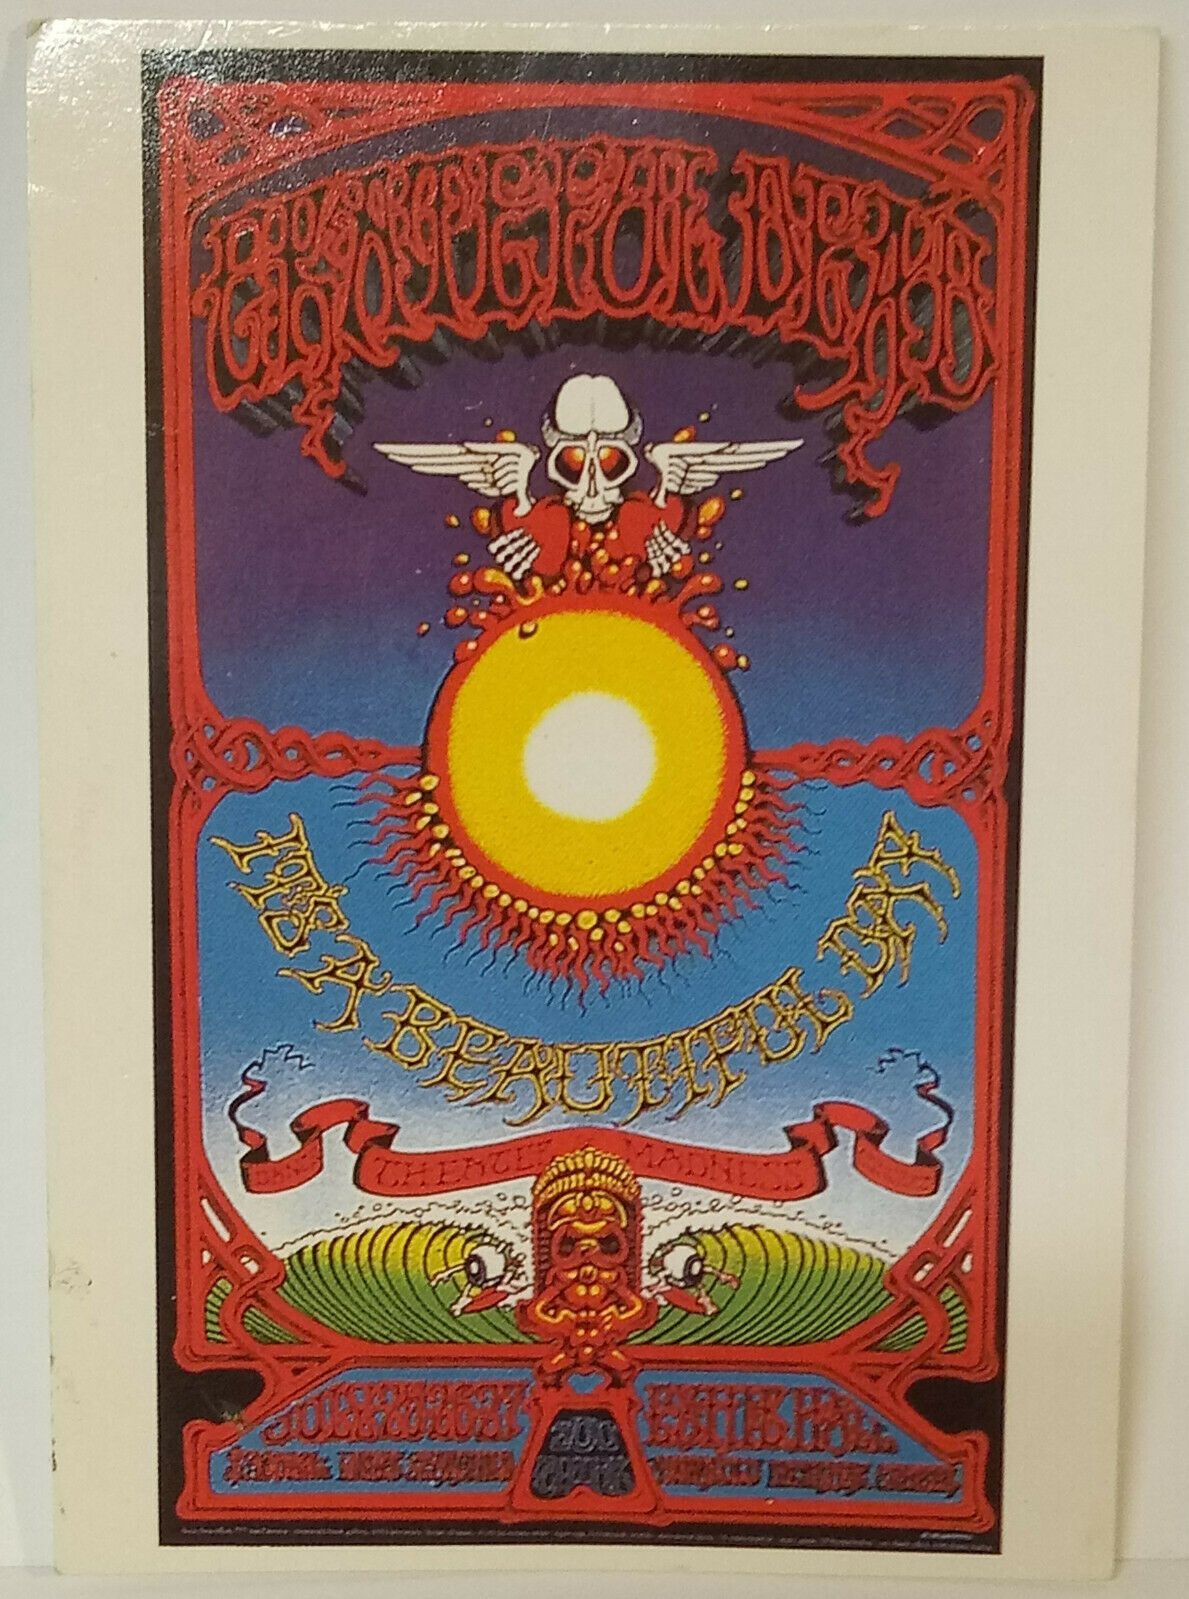 Grateful Dead Cancelled Show In Honolulu 7/25/1969 Rick Griffin Postcard